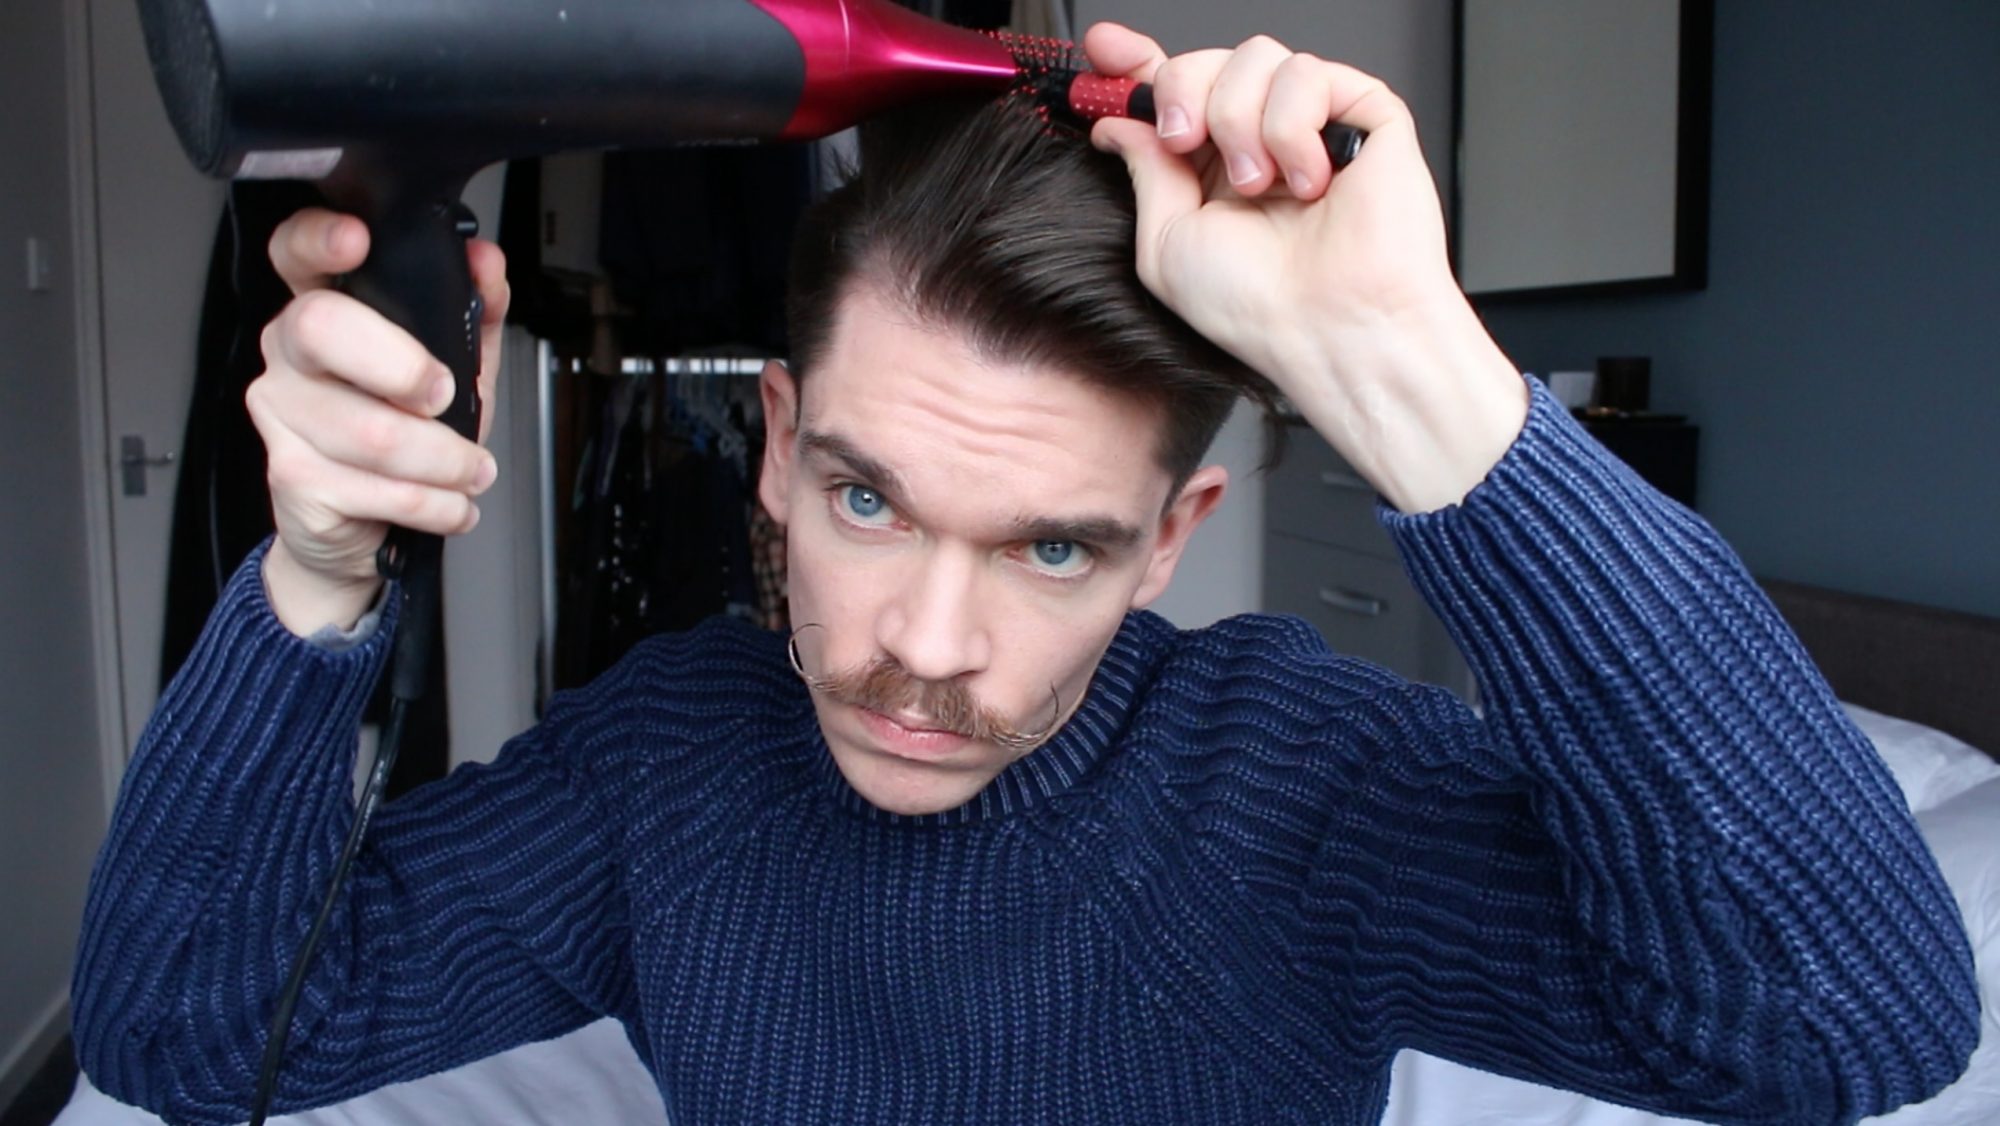 What Is A Pre-Styler? The Best Pre-Styler For You? | Man For Himself